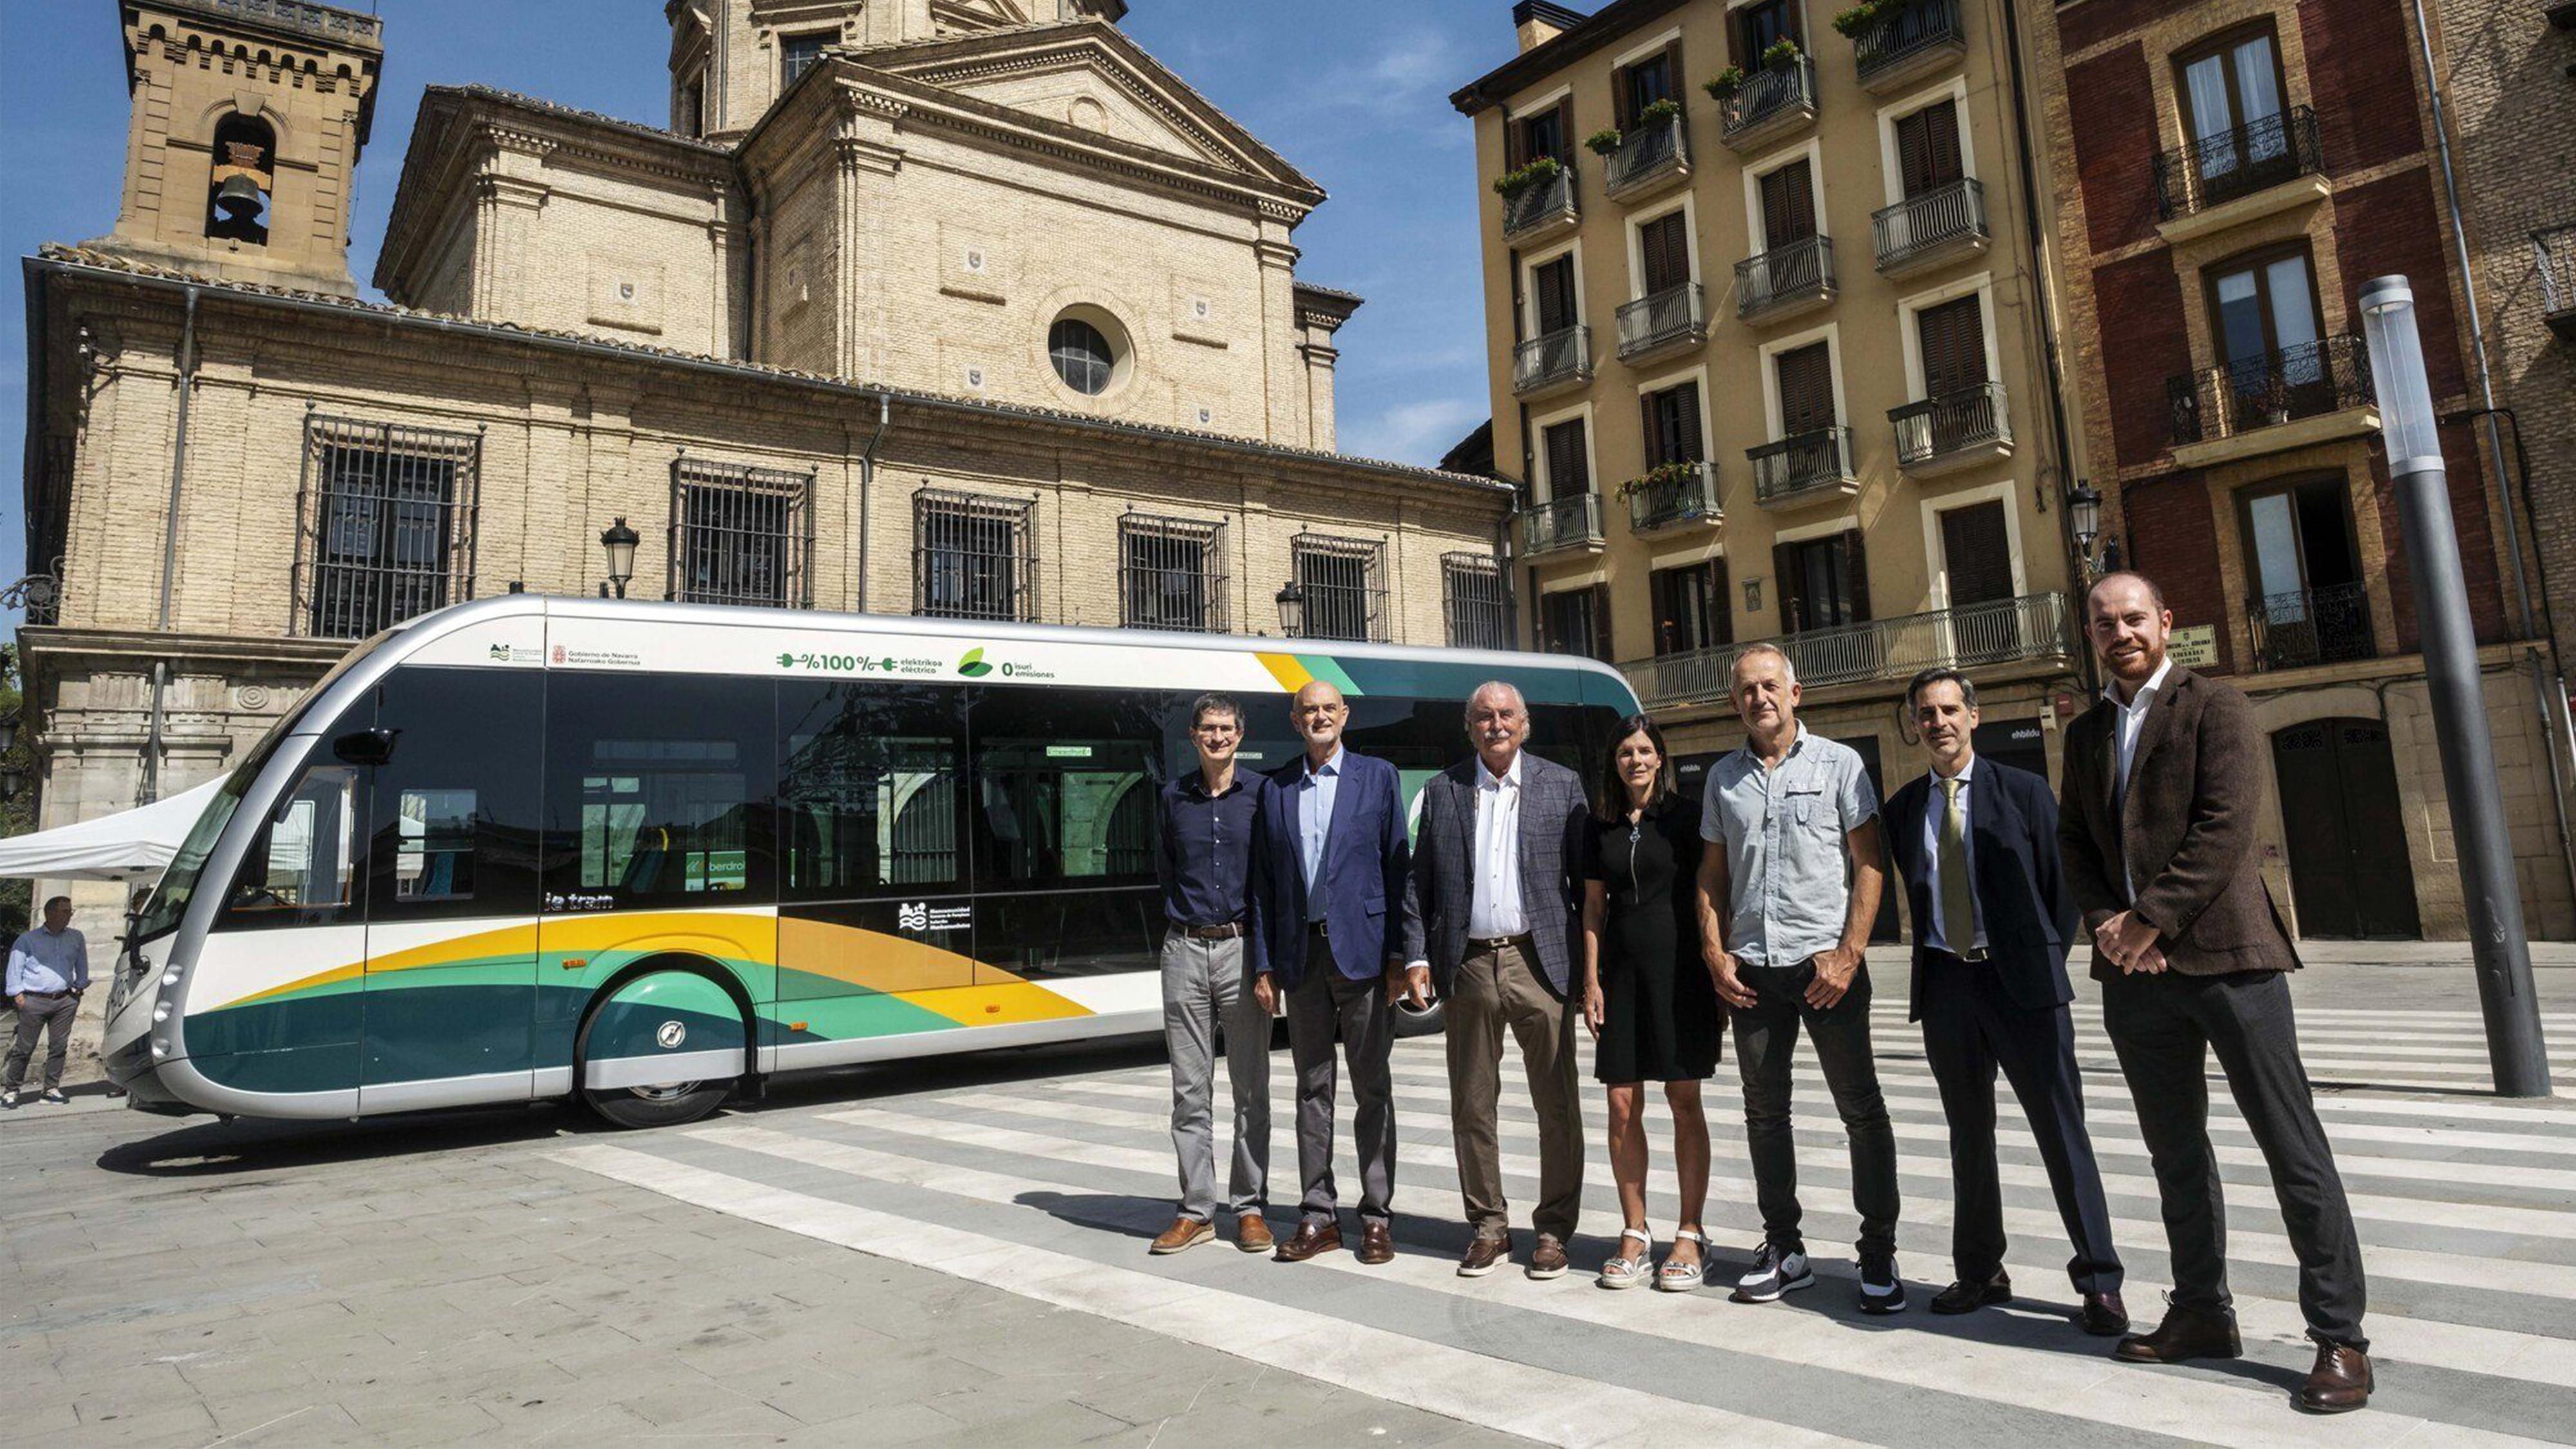 We had the pleasure of attending the presentation of the new buses operated by Transports Ciutat Comtal (TCC) of the Moventis group in Pamplona